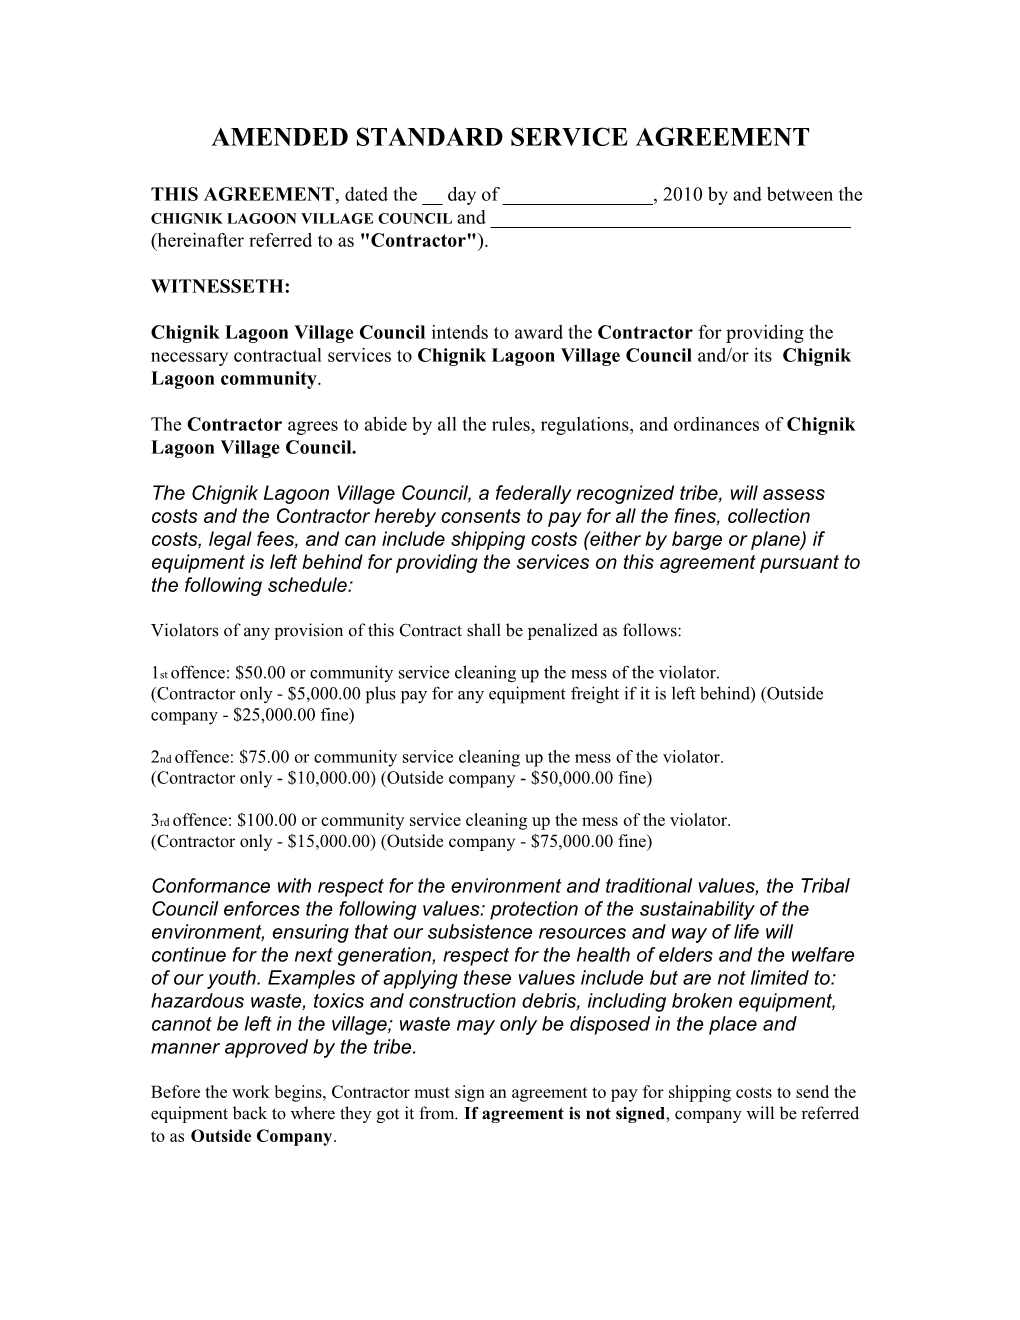 Amended Standard Service Agreement